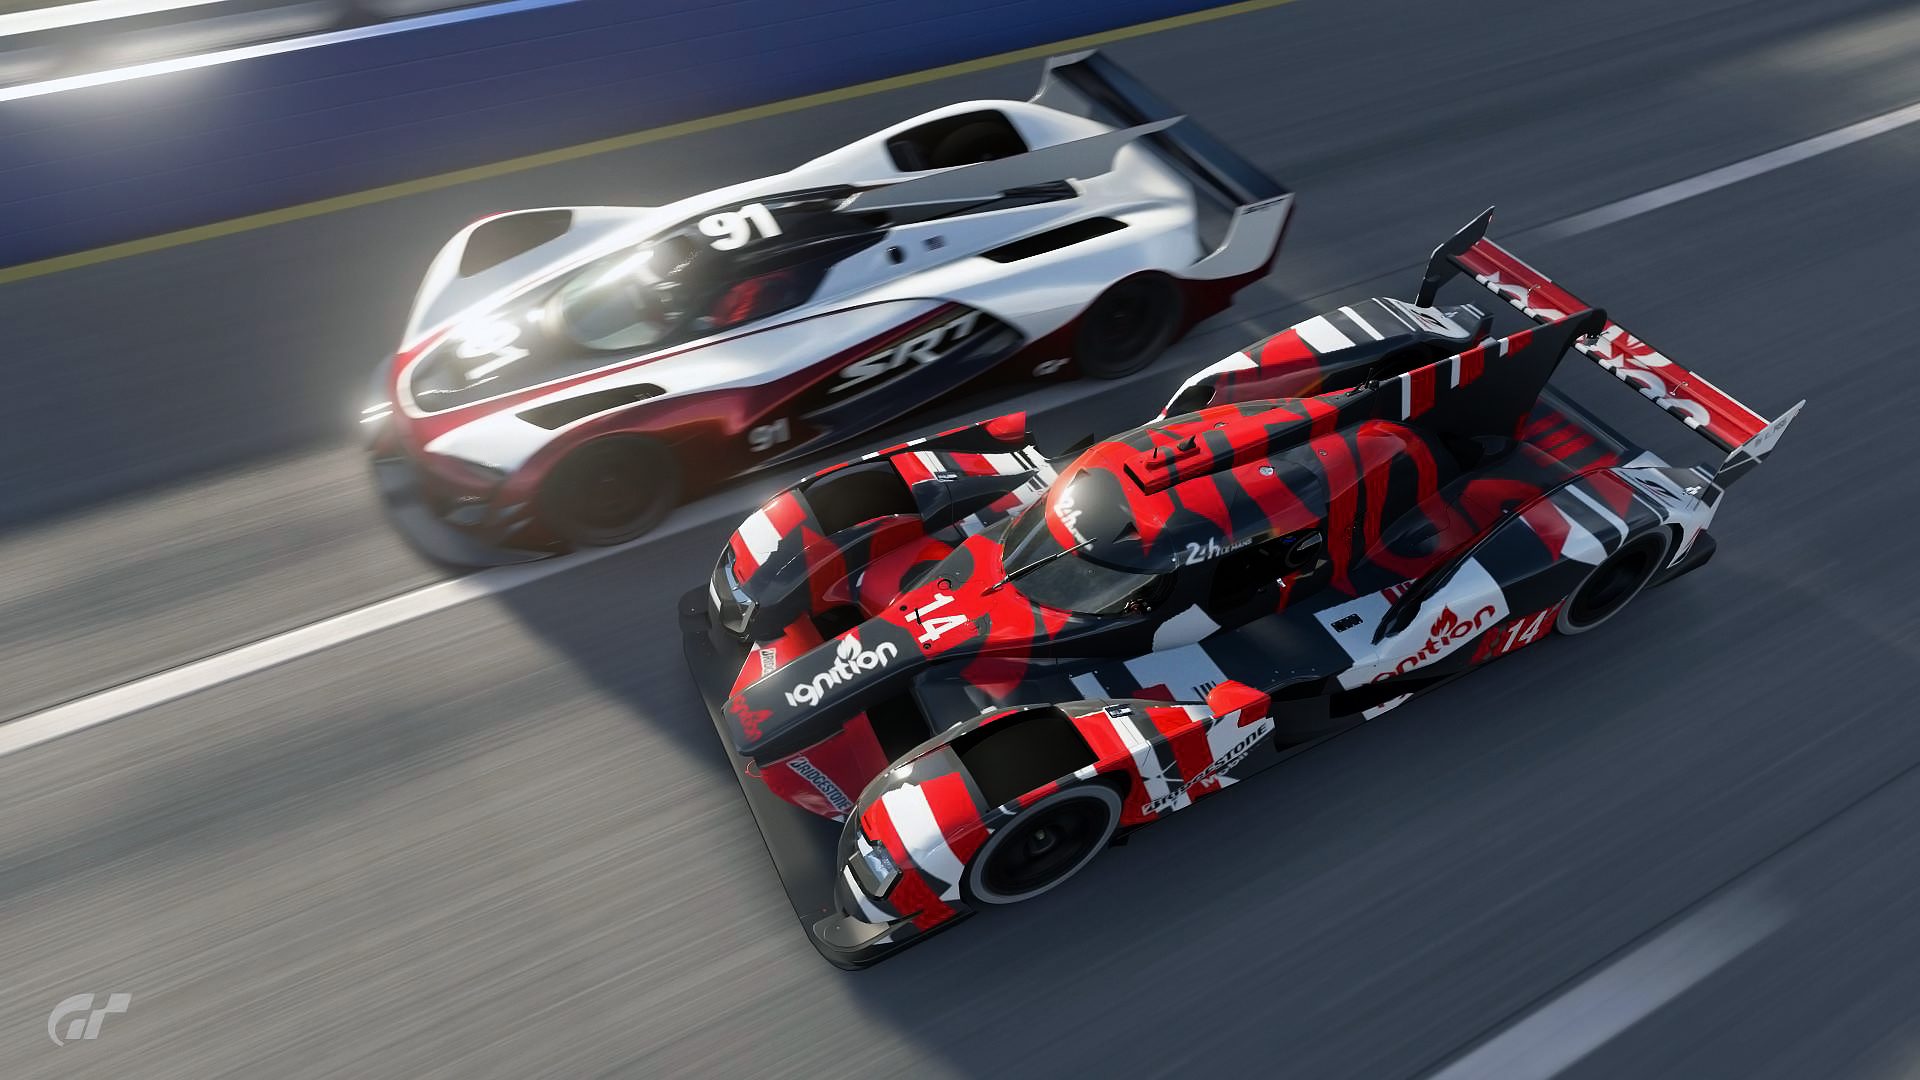 Gran Turismo 7 won't be online-focused, to be traditional like GT1